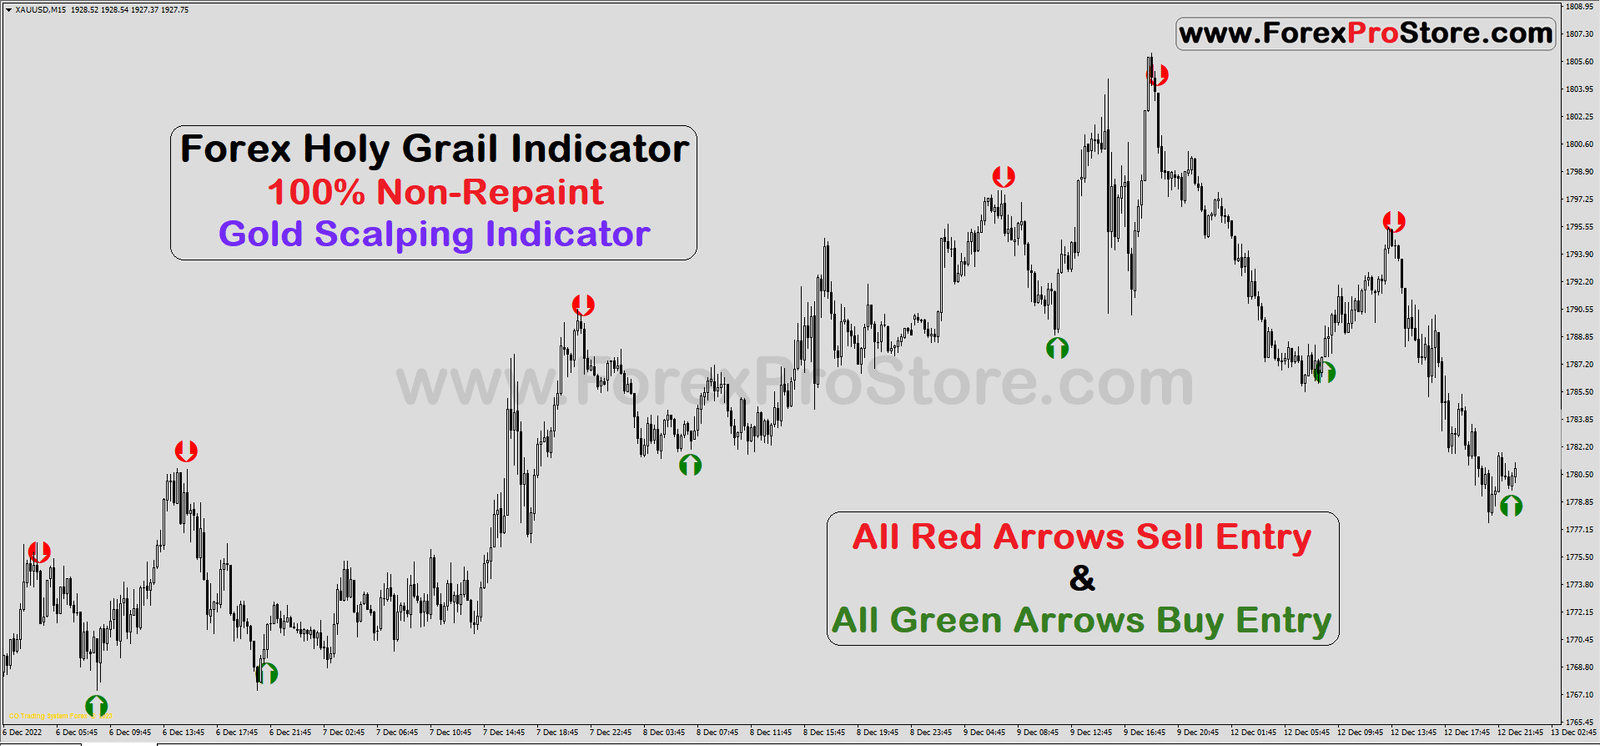 Forex Holy Grail Indicator